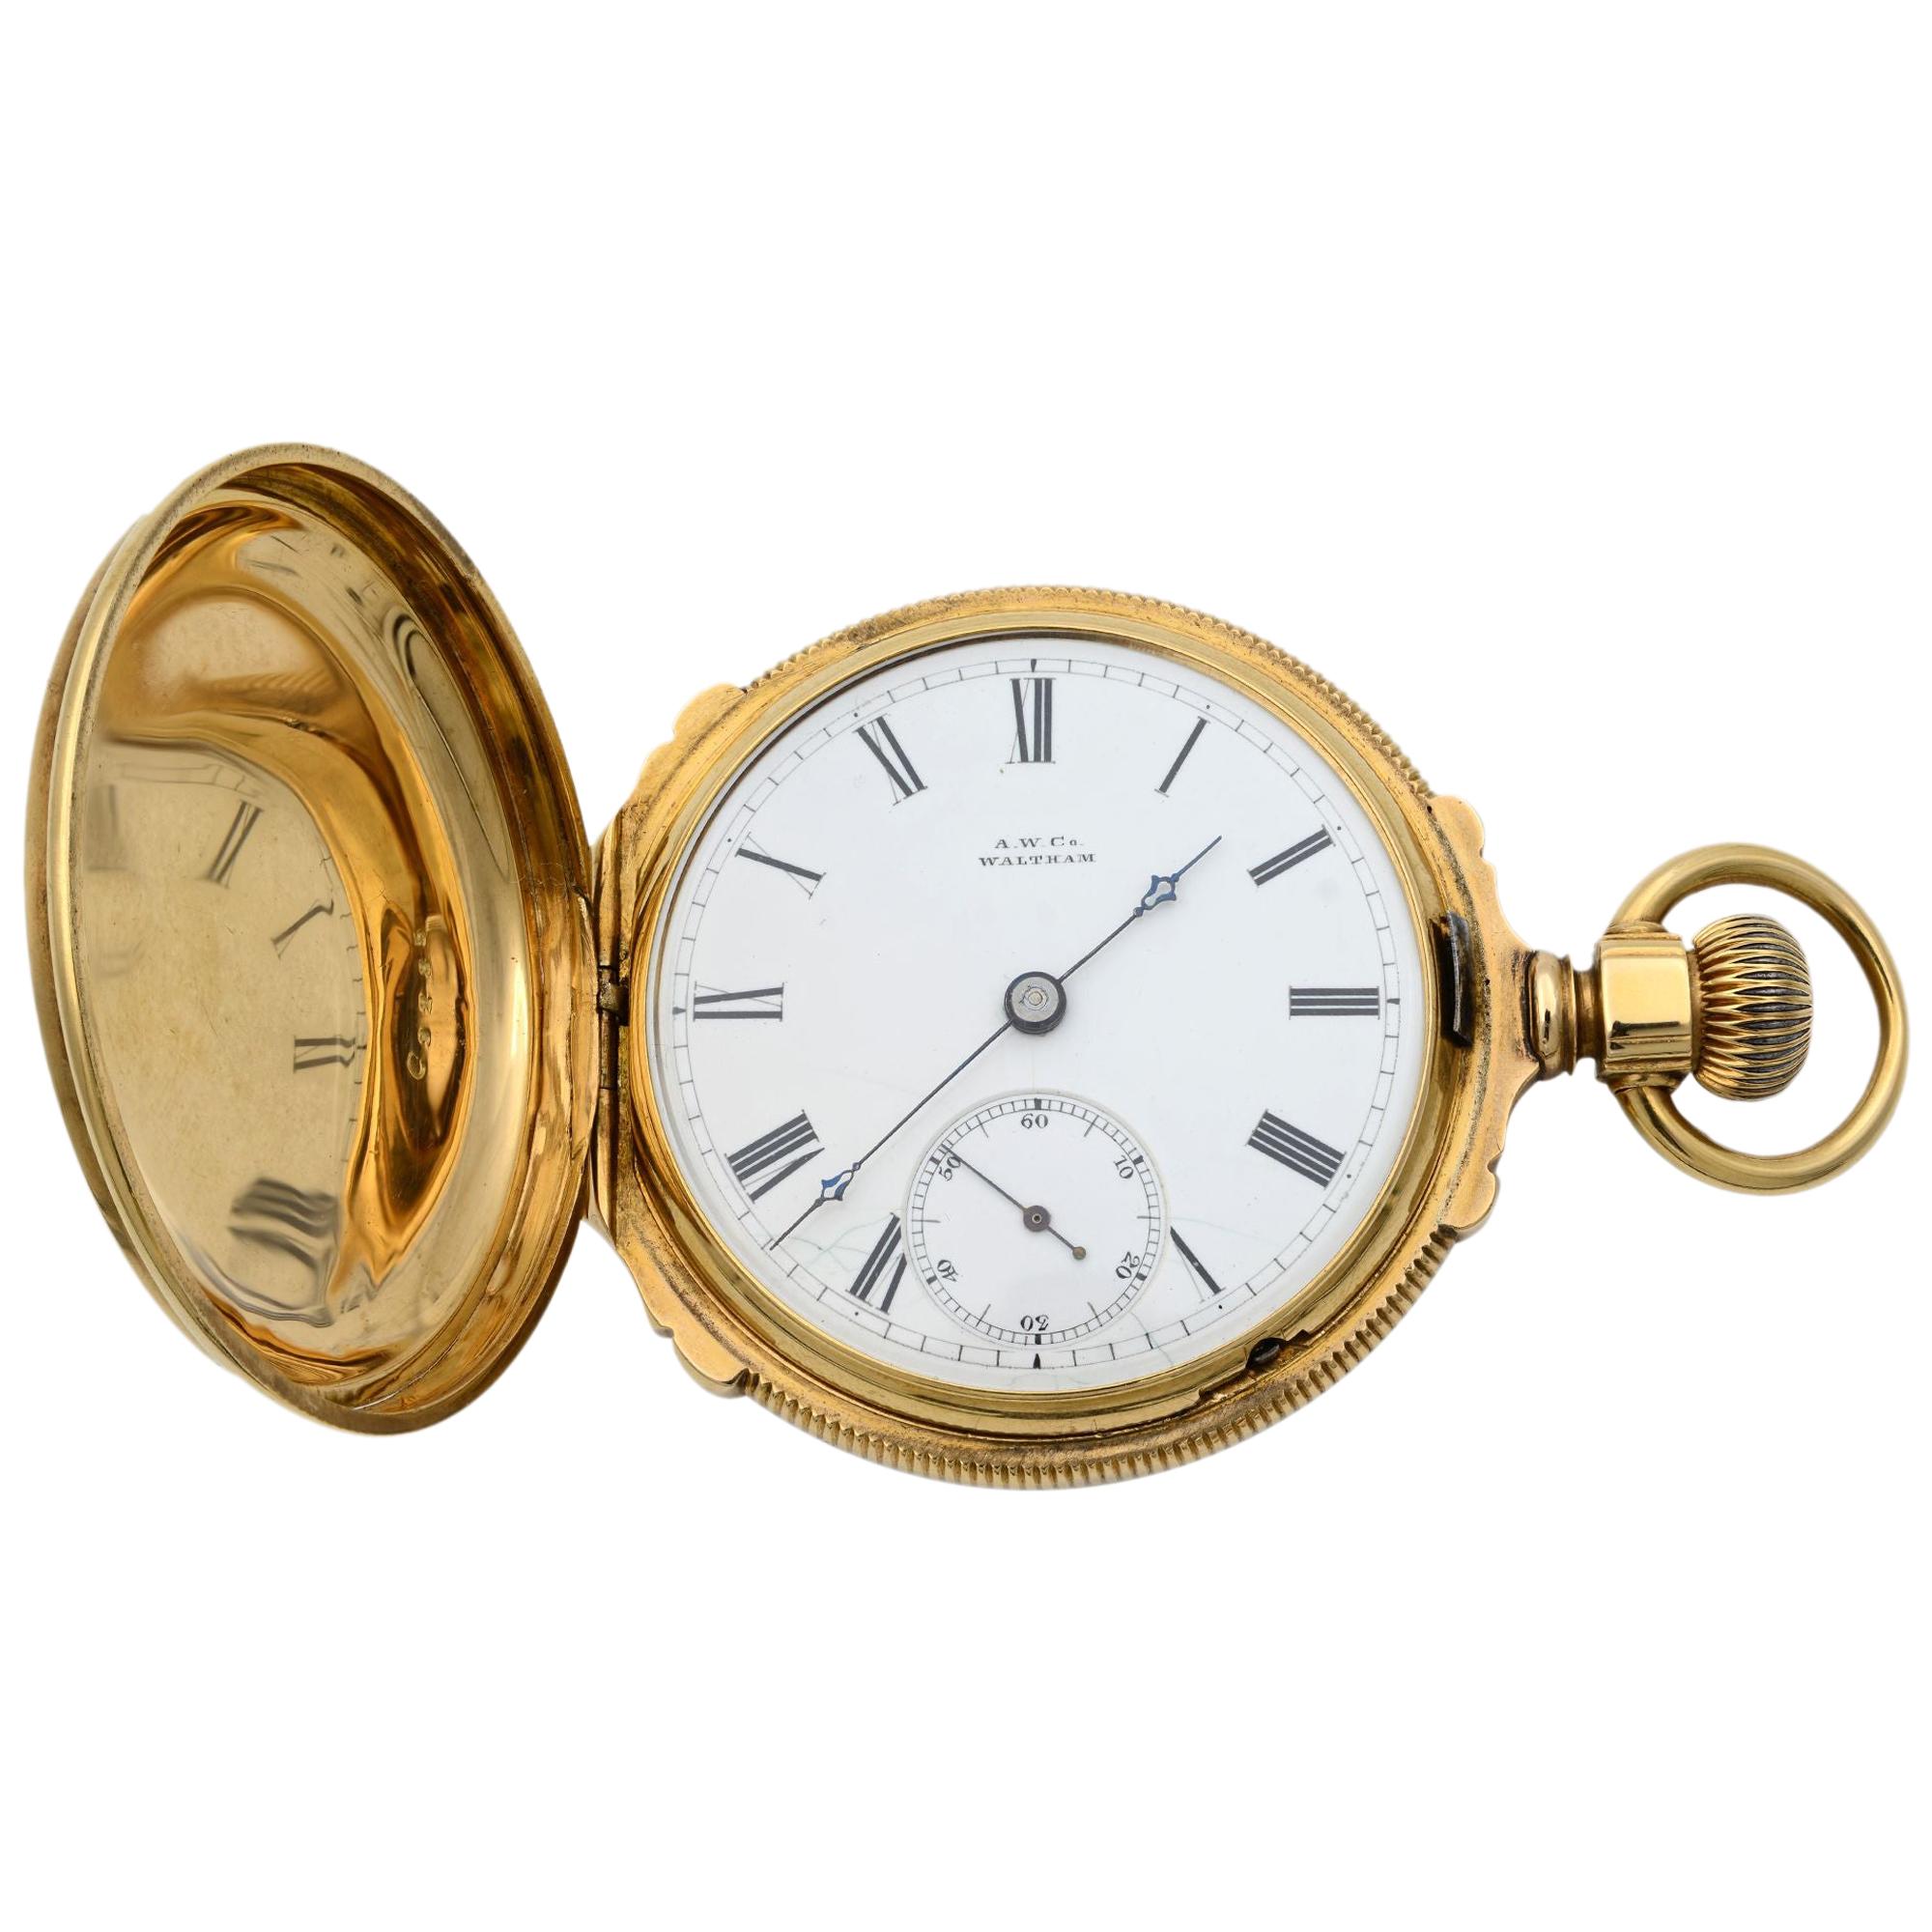 What years were Waltham pocket watches made?